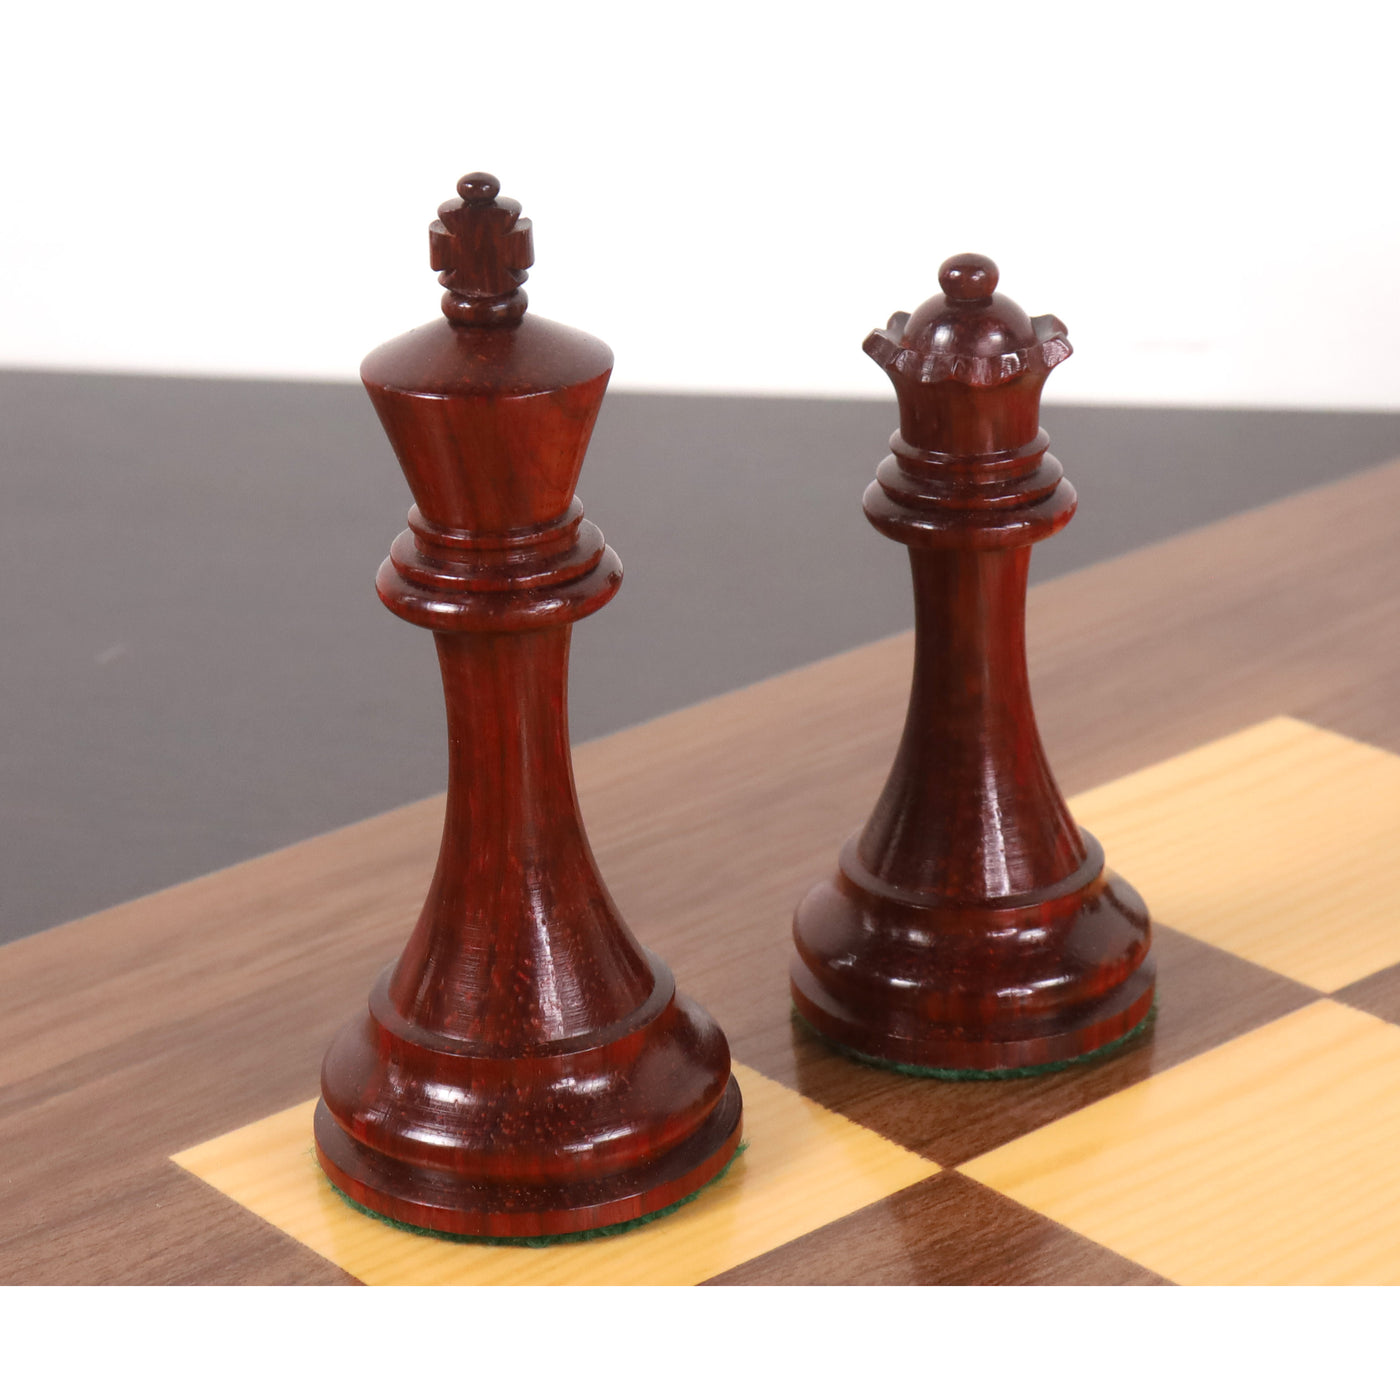 Slightly Imperfect 2021 Sinquefield Cup Reproduced Staunton Chess Pieces Only set - Triple weighted Bud Rosewood